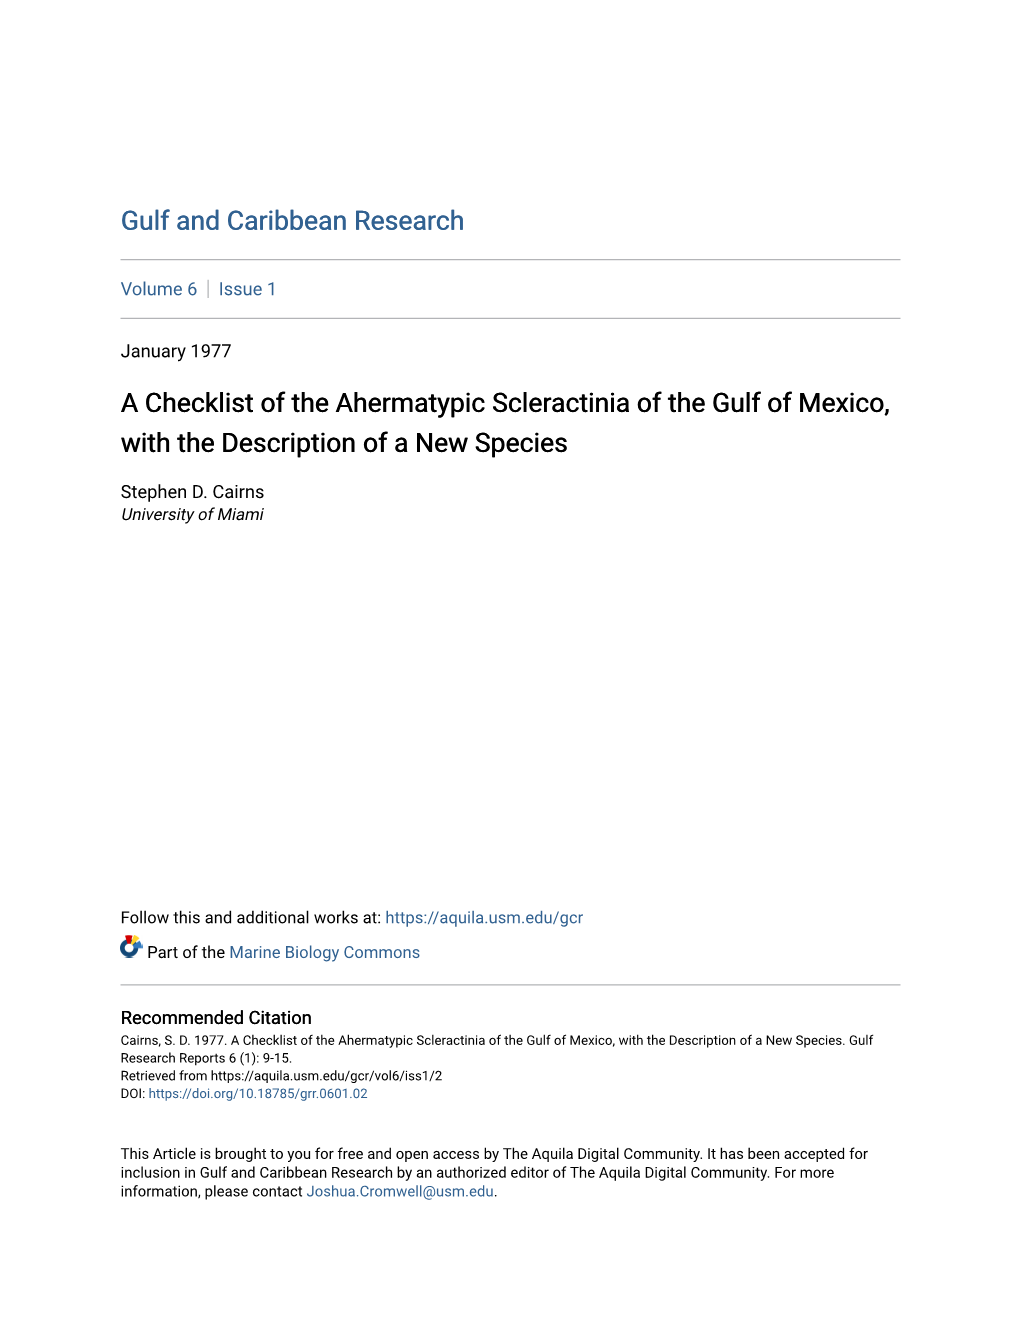 A Checklist of the Ahermatypic Scleractinia of the Gulf of Mexico, with the Description of a New Species